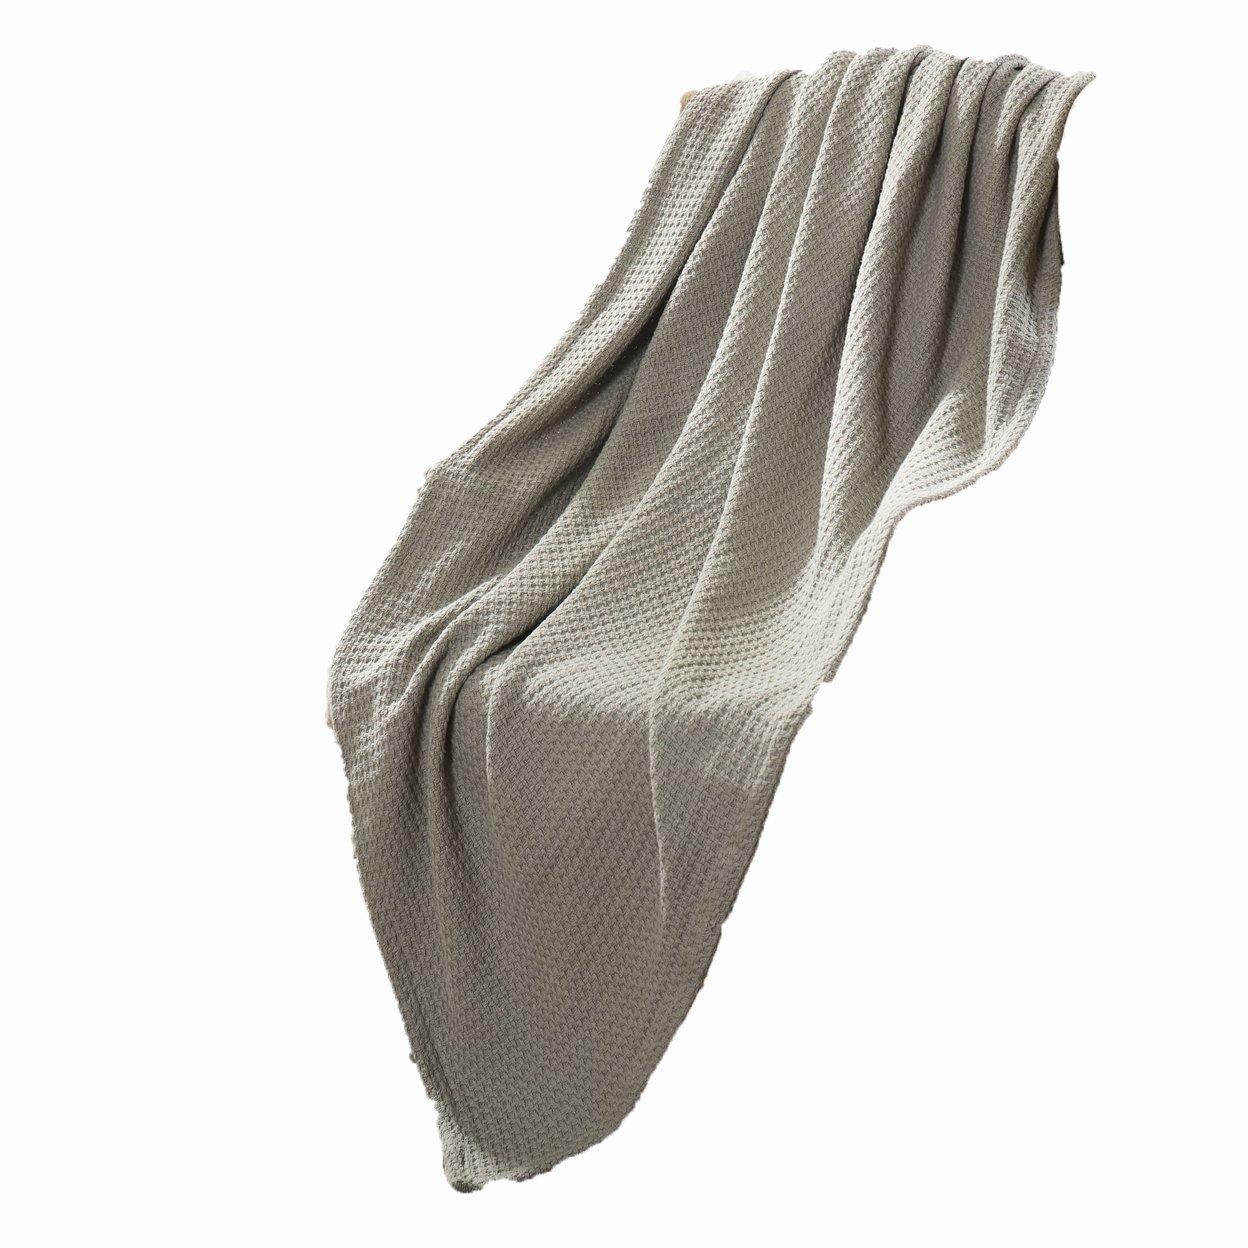 Nyx King Size Ultra Soft Cotton Thermal Blanket, Textured Feel, Taupe- Saltoro Sherpi